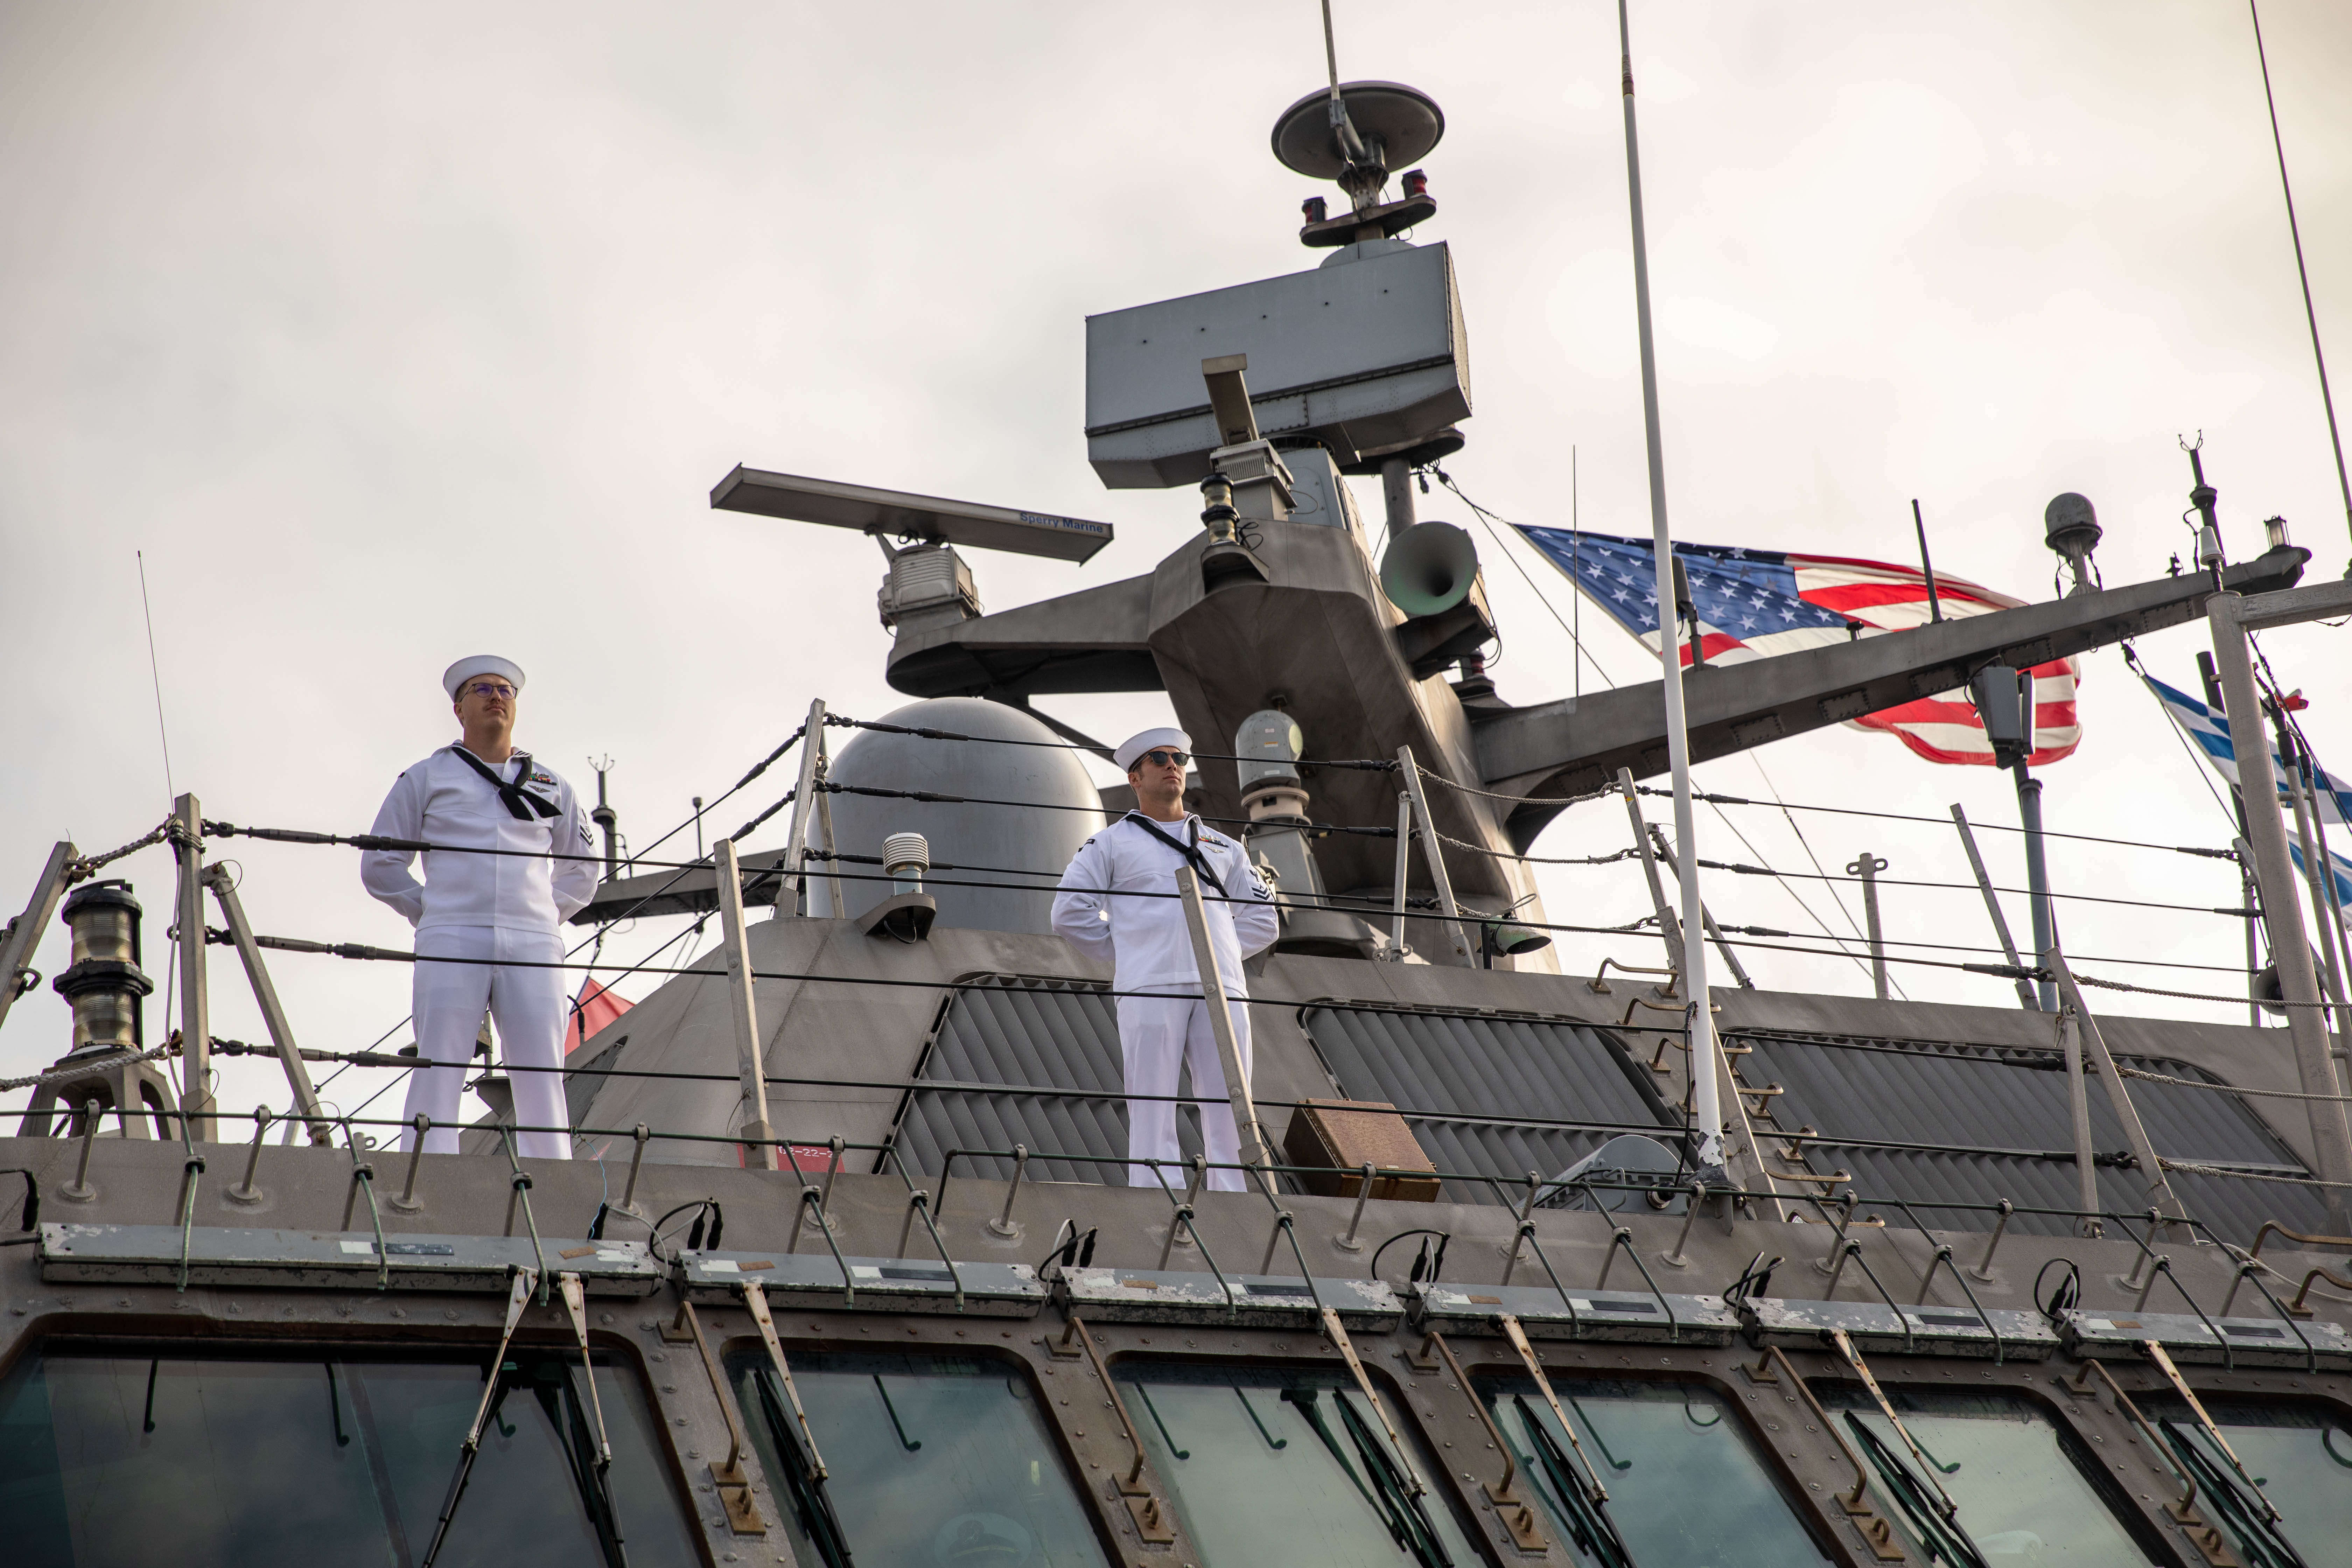 Information Systems Technician 2nd Class Slade Dubberly and Gunner’s Mate 2nd Class Edward Kawczak man the rails aboard the Freedom-variant littoral combat ship USS Milwaukee (LCS 5) as the ship returns from deployment to Naval Station Mayport.